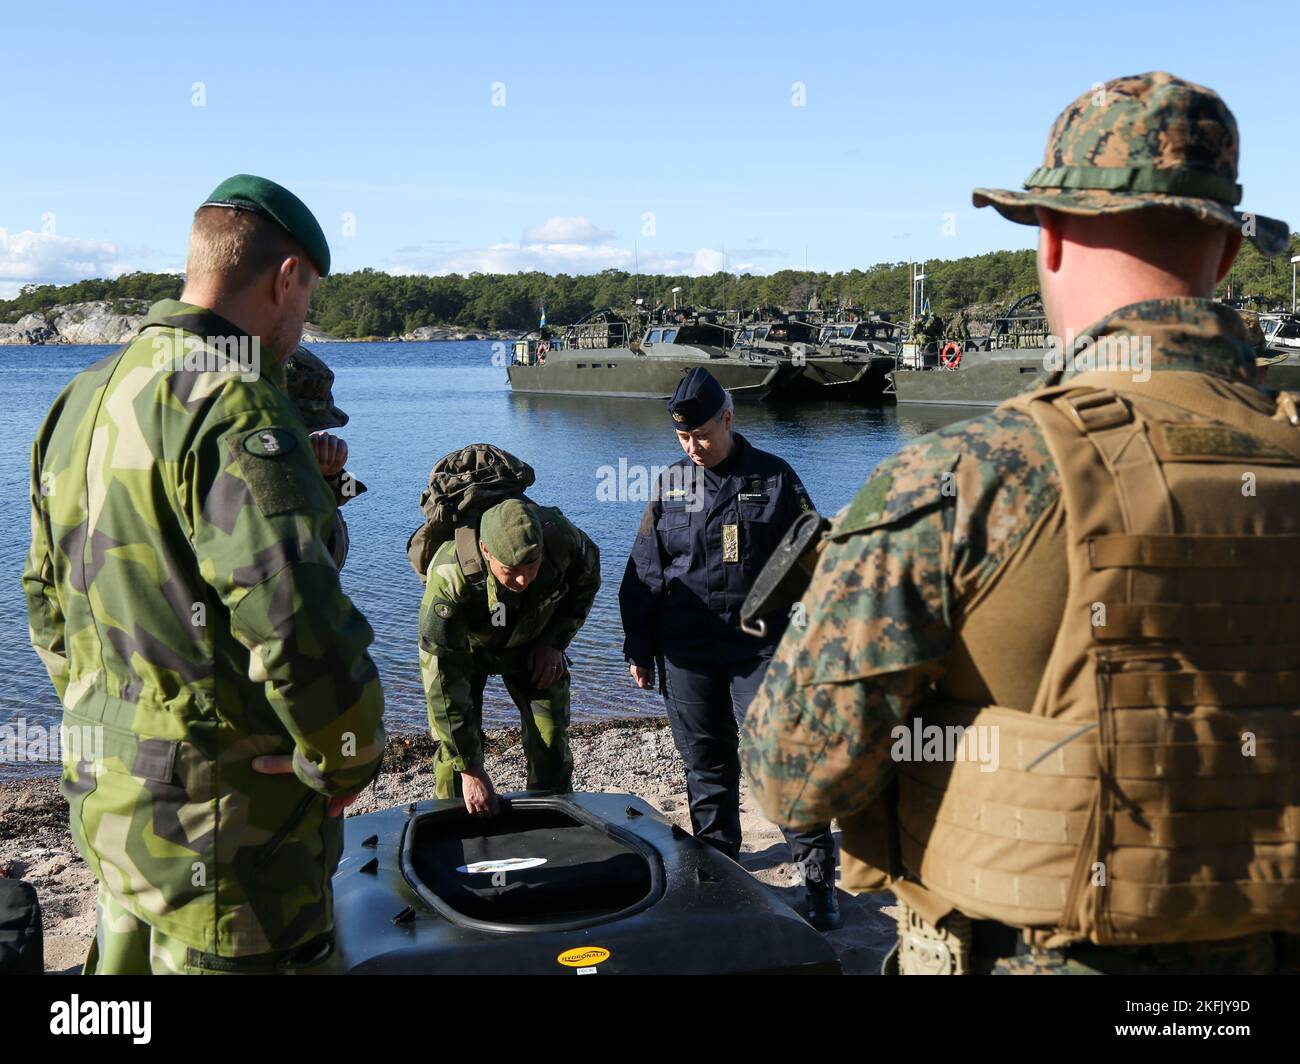 Swedish Navy Rear Admiral Ewa Skoog Haslum (right), Chief of Swedish Navy, and Swedish Marine leadership, receive a demonstration on how unmanned surface vehicles are used in support of expeditionary advanced base operations, while visiting U.S. and Swedish Marines during exercise Archipelago Endeavor 22 (AE22) on Berga Naval Base, Sweden, Sept. 21, 2022. AE22 is an integrated field training exercise that increases operational capability and enhances strategic cooperation between the U.S. Marines and Swedish forces. Stock Photo